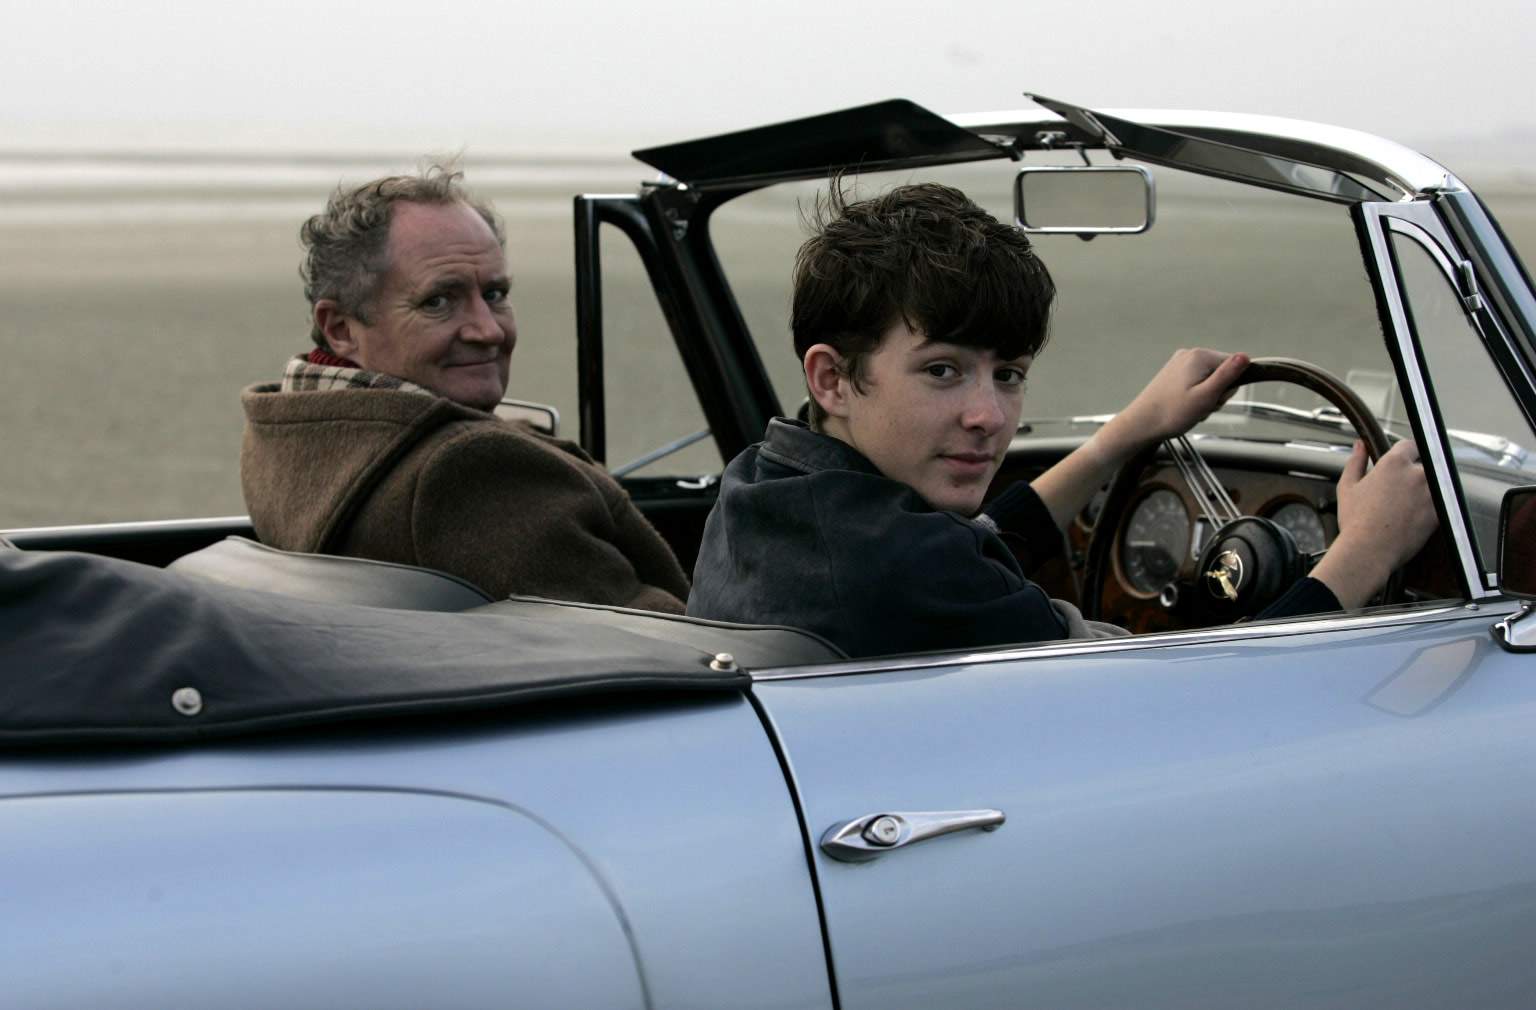 Jim Broadbent as Arthur Morrison and Matthew Beard as Young Blake in Sony Pictures Classics' When Did You Last See Your Father? (2007).